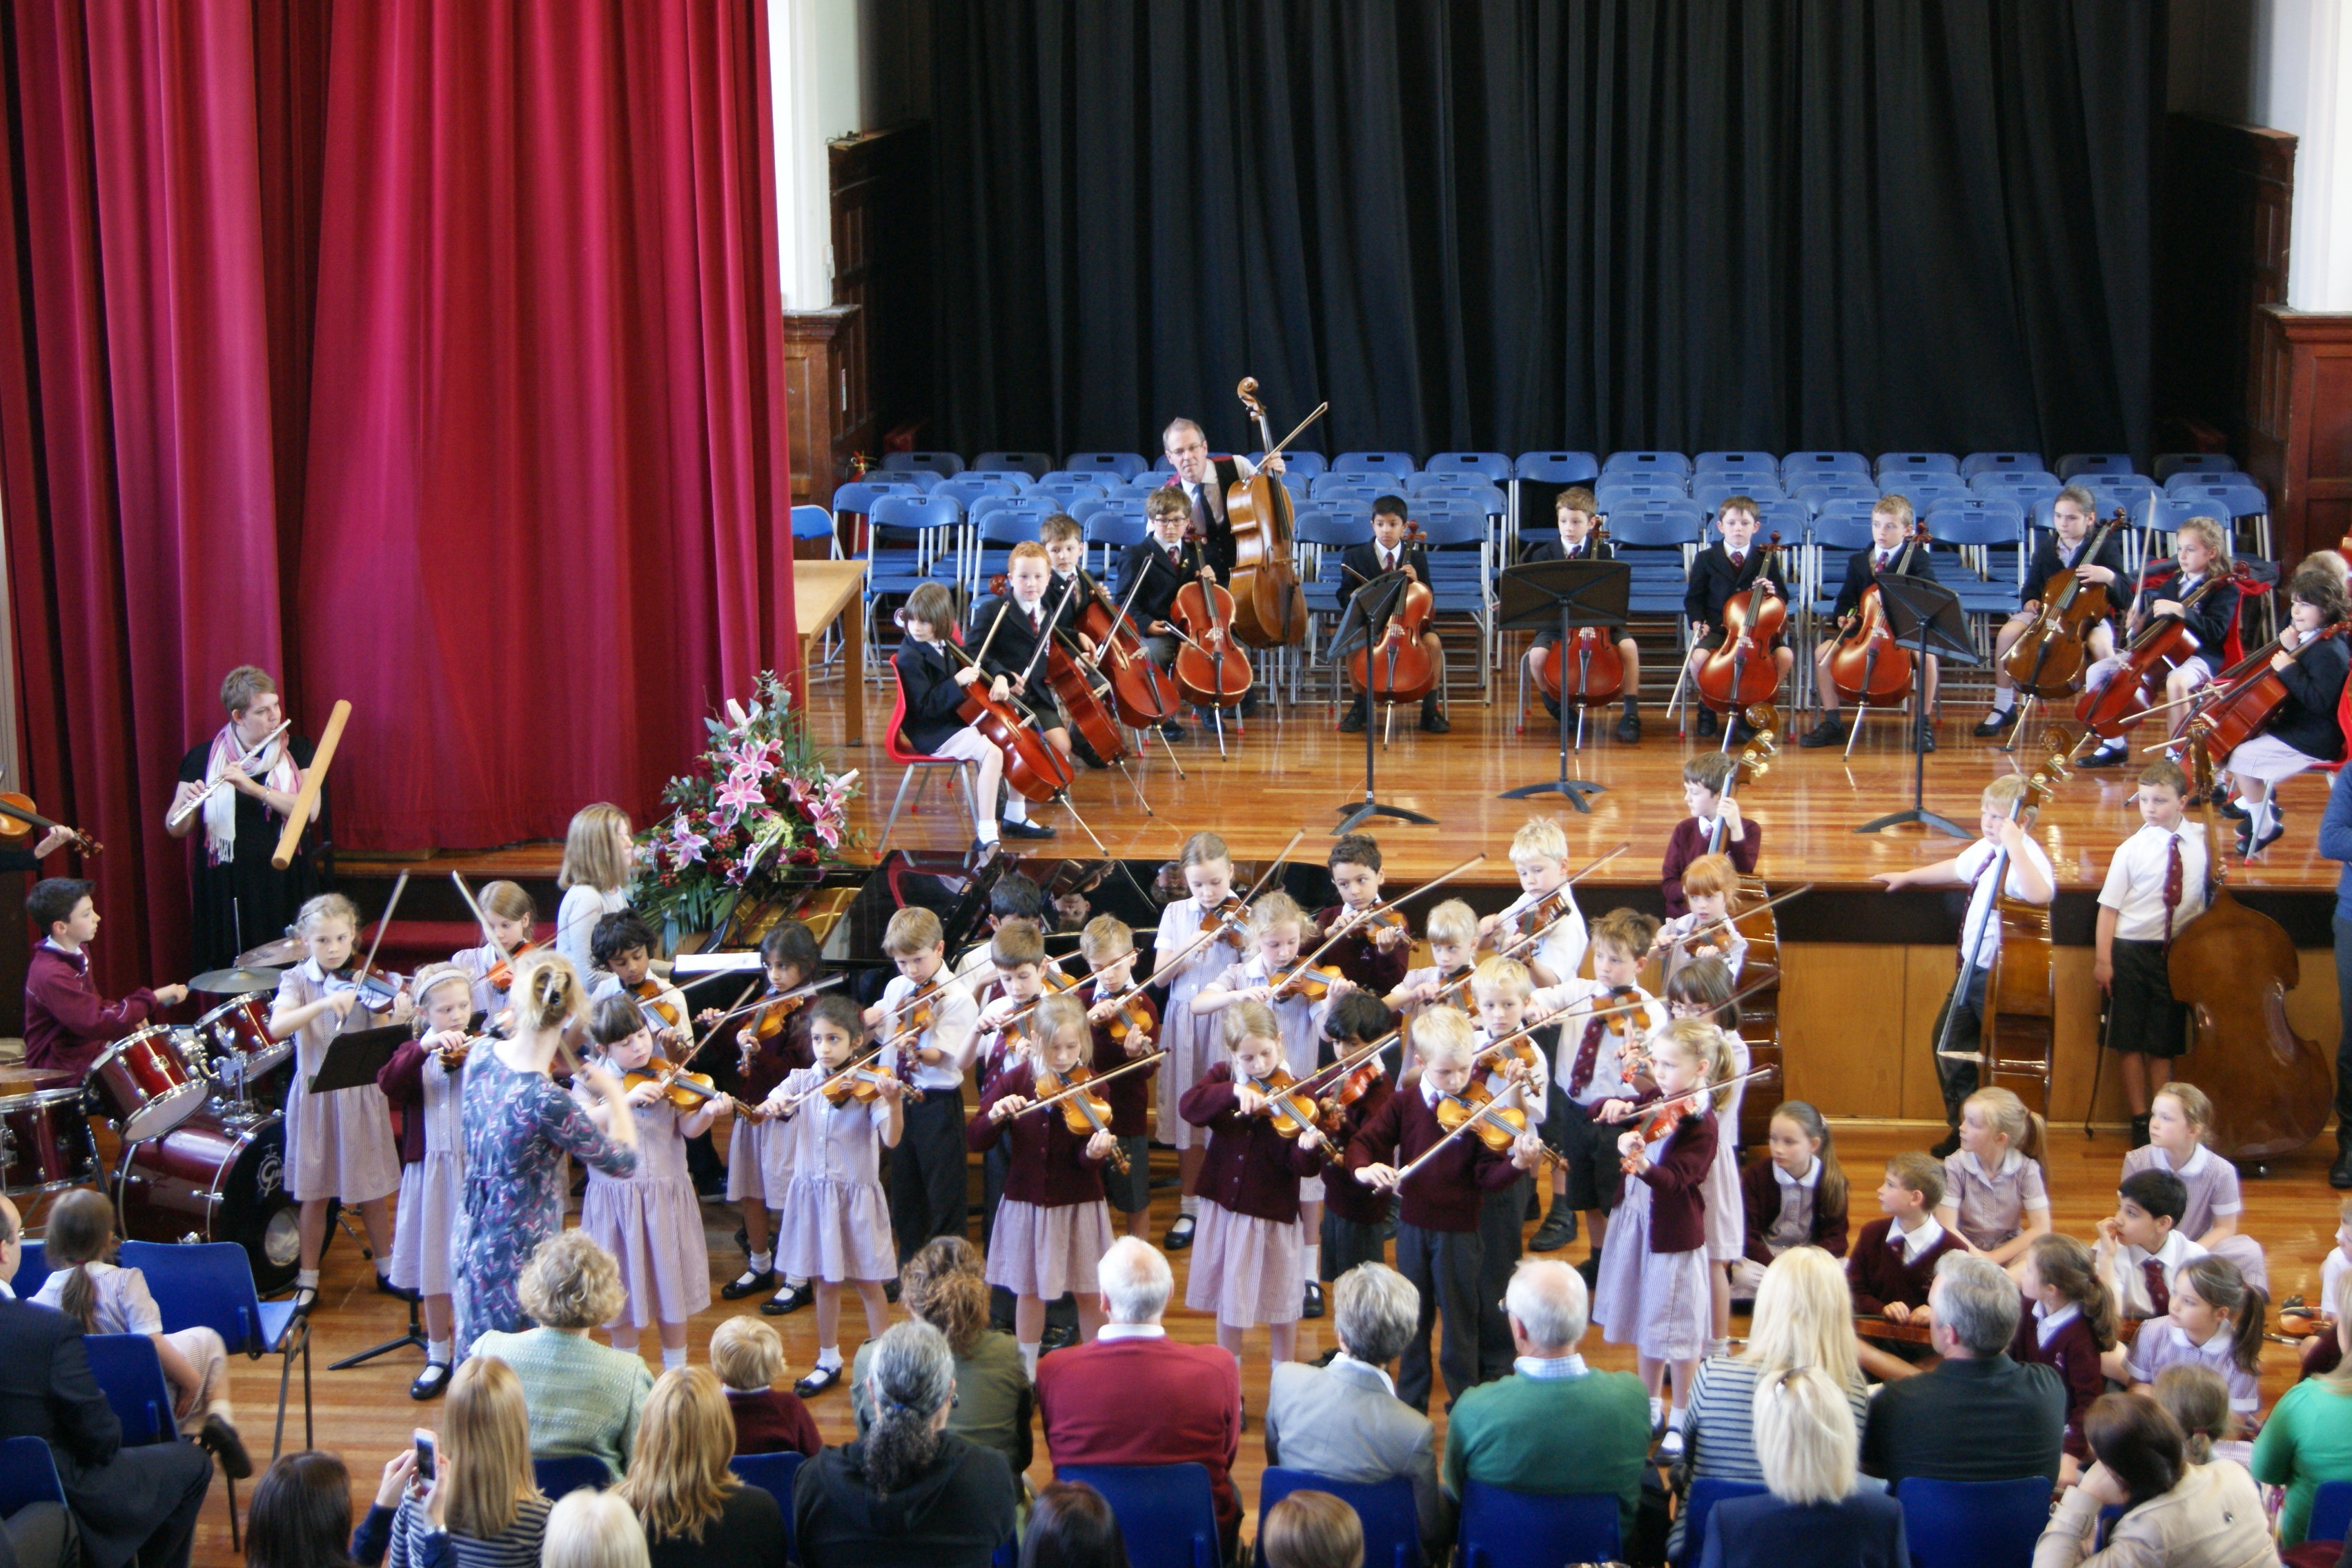 7th May 2015, Year 3 Strings Concert in Routh Hall